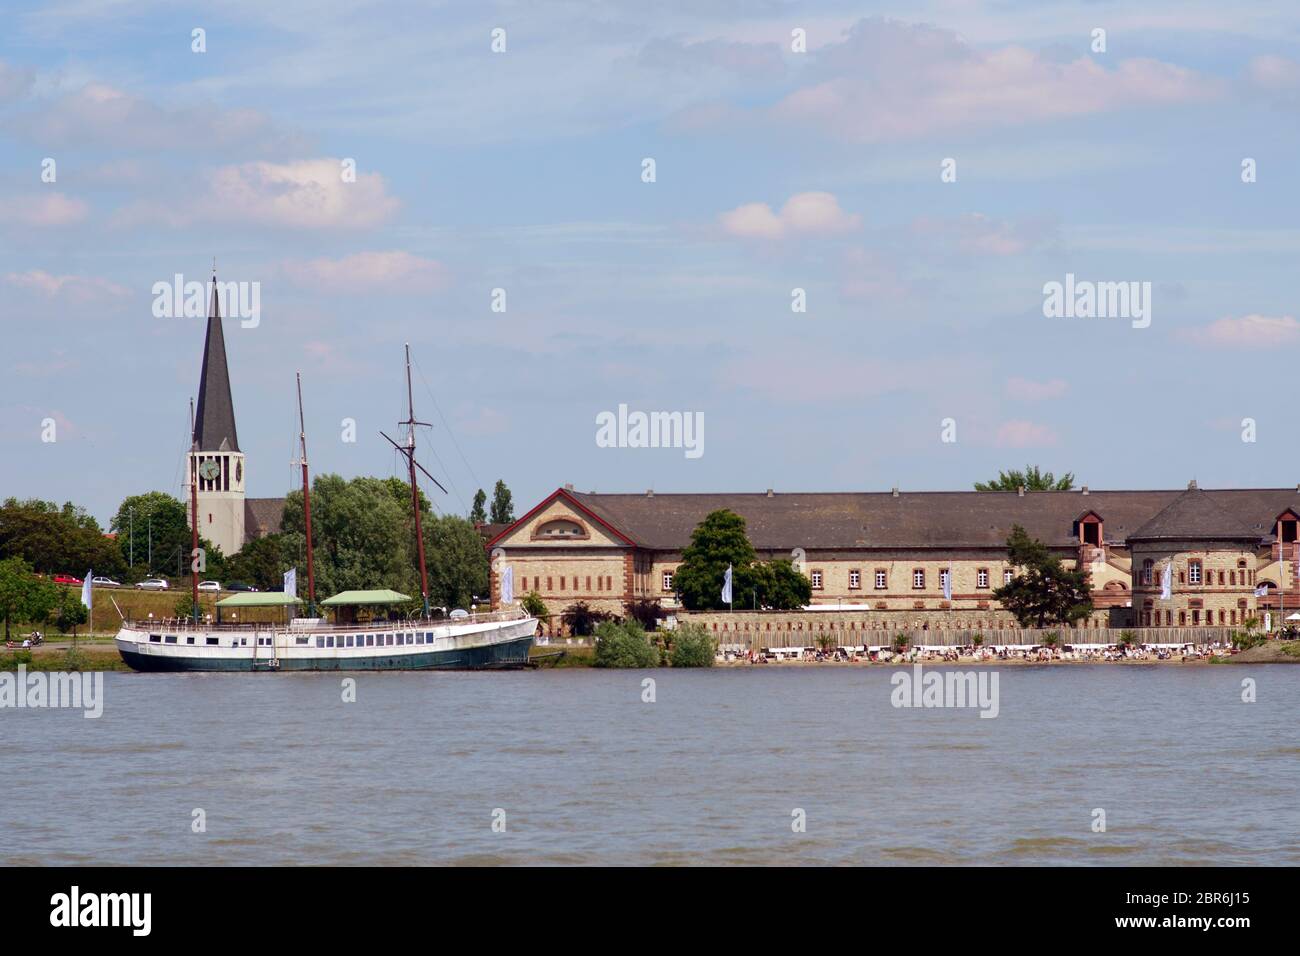 The banks and the promenade along the river Rhine in Mainz Kastel with the Kasteler beach and the beach boat as well as the St. George church in the b Stock Photo